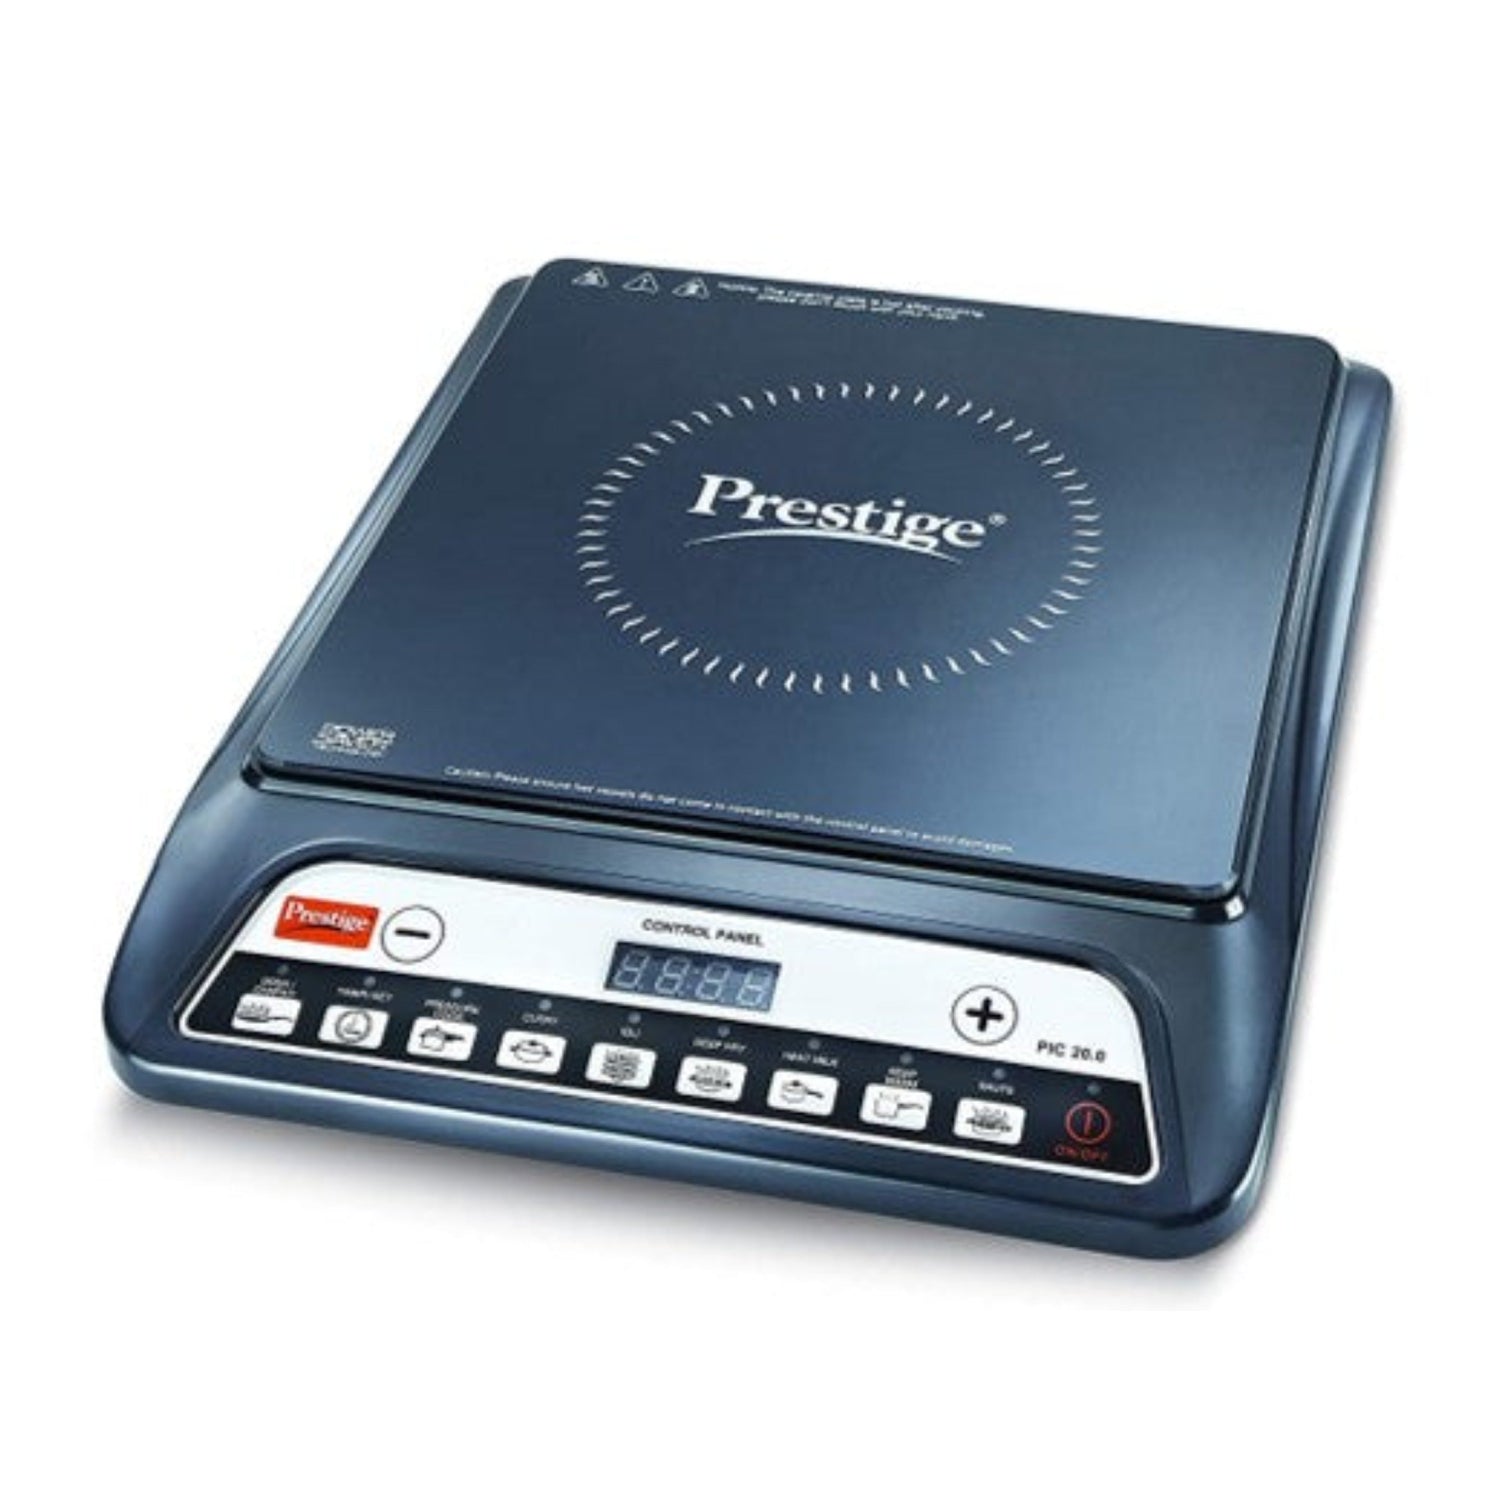 Prestige Induction Cook-Top Pic 20.0